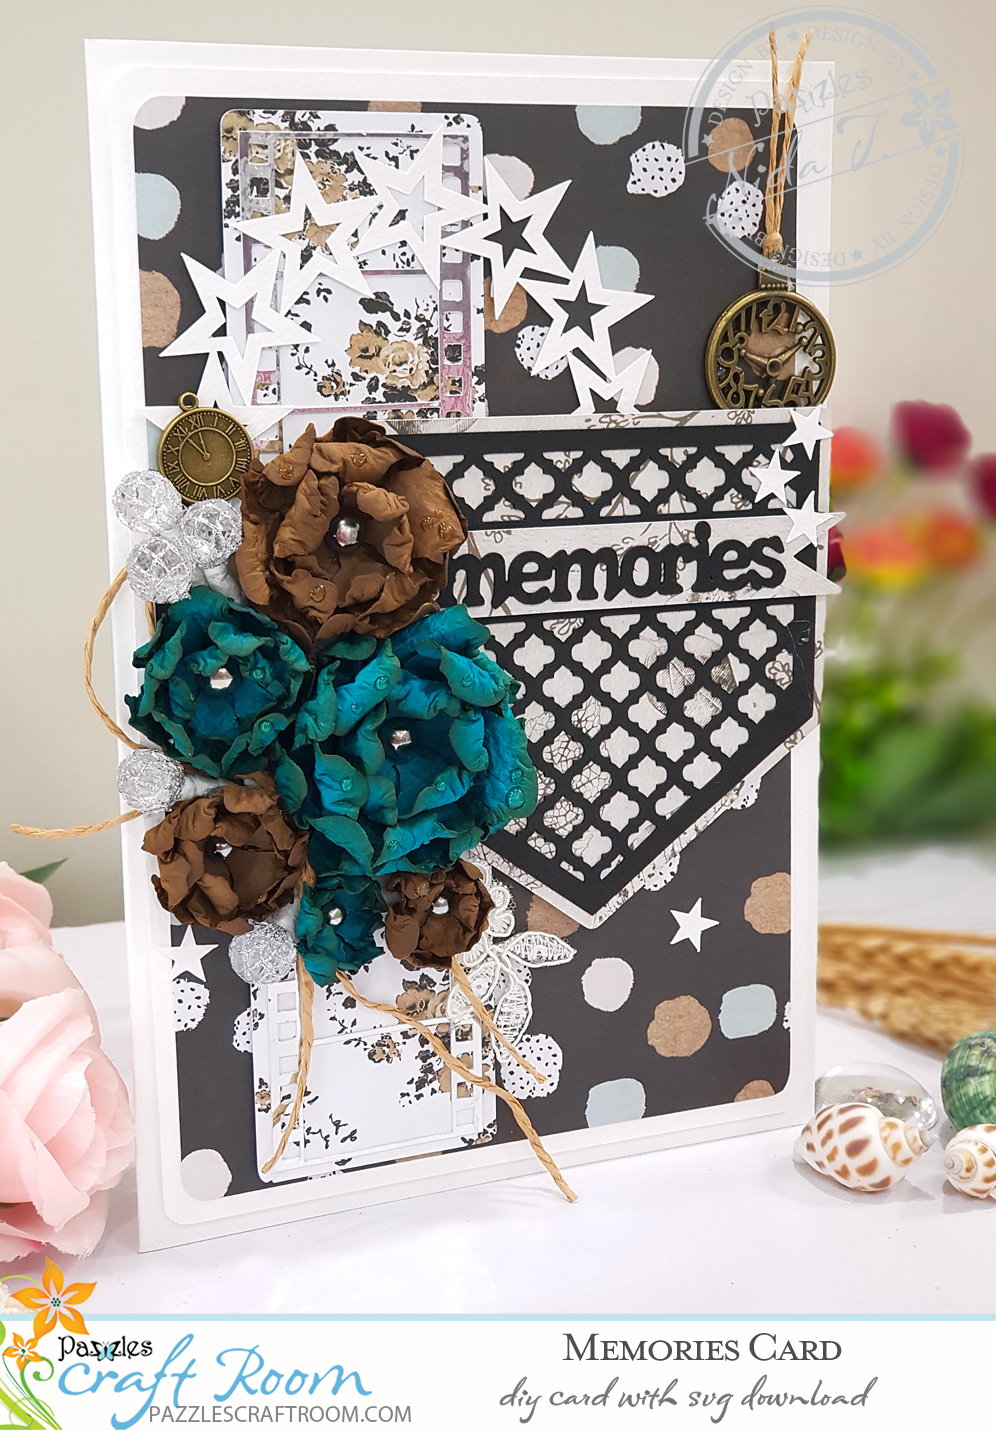 Pazzles DIY Memories Card with instant SVG download. Compatible with all major electronic cutters including Pazzles Inspiration, Cricut, and Silhouette Cameo. Design by Nida Tanweer.